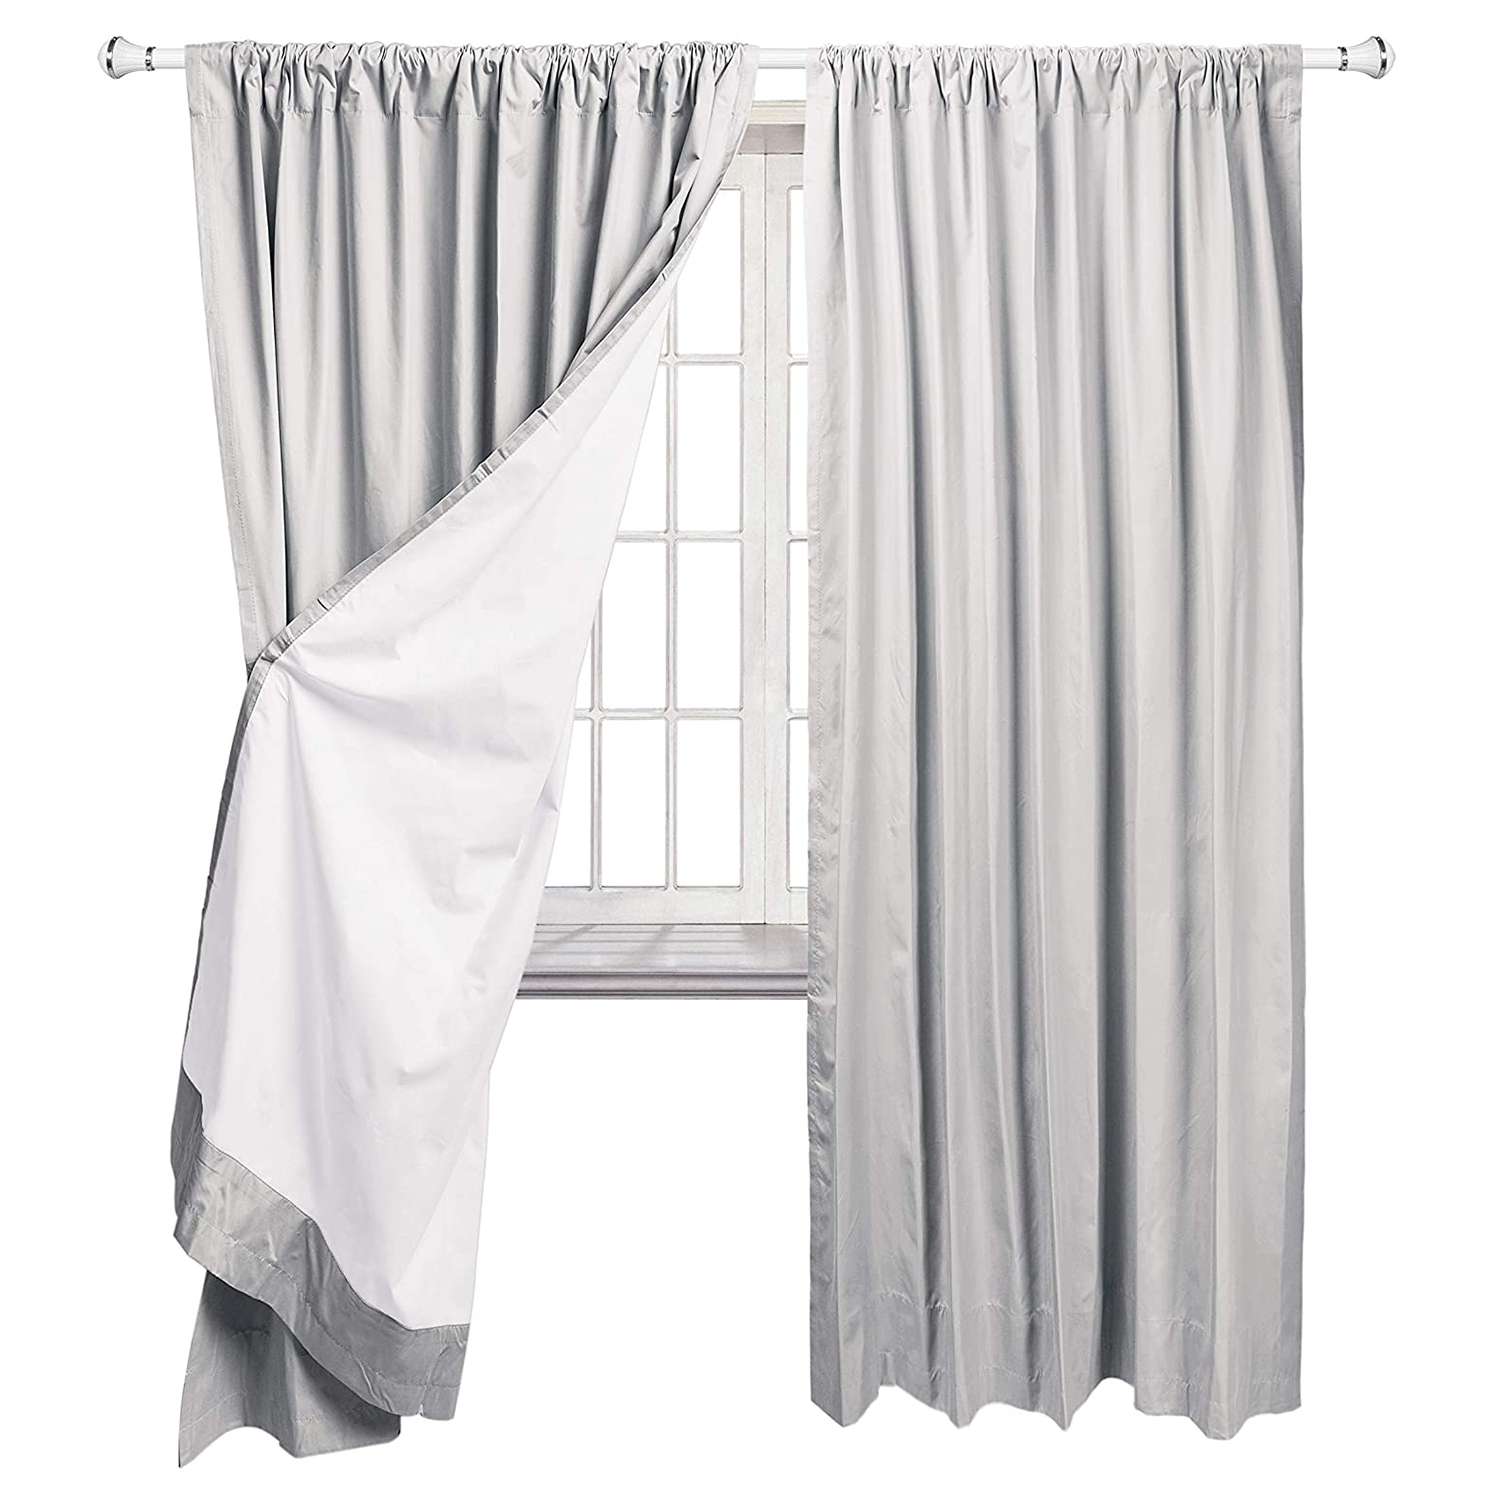 The 10 Best Blackout Curtains, According to Reviews | Real Simple